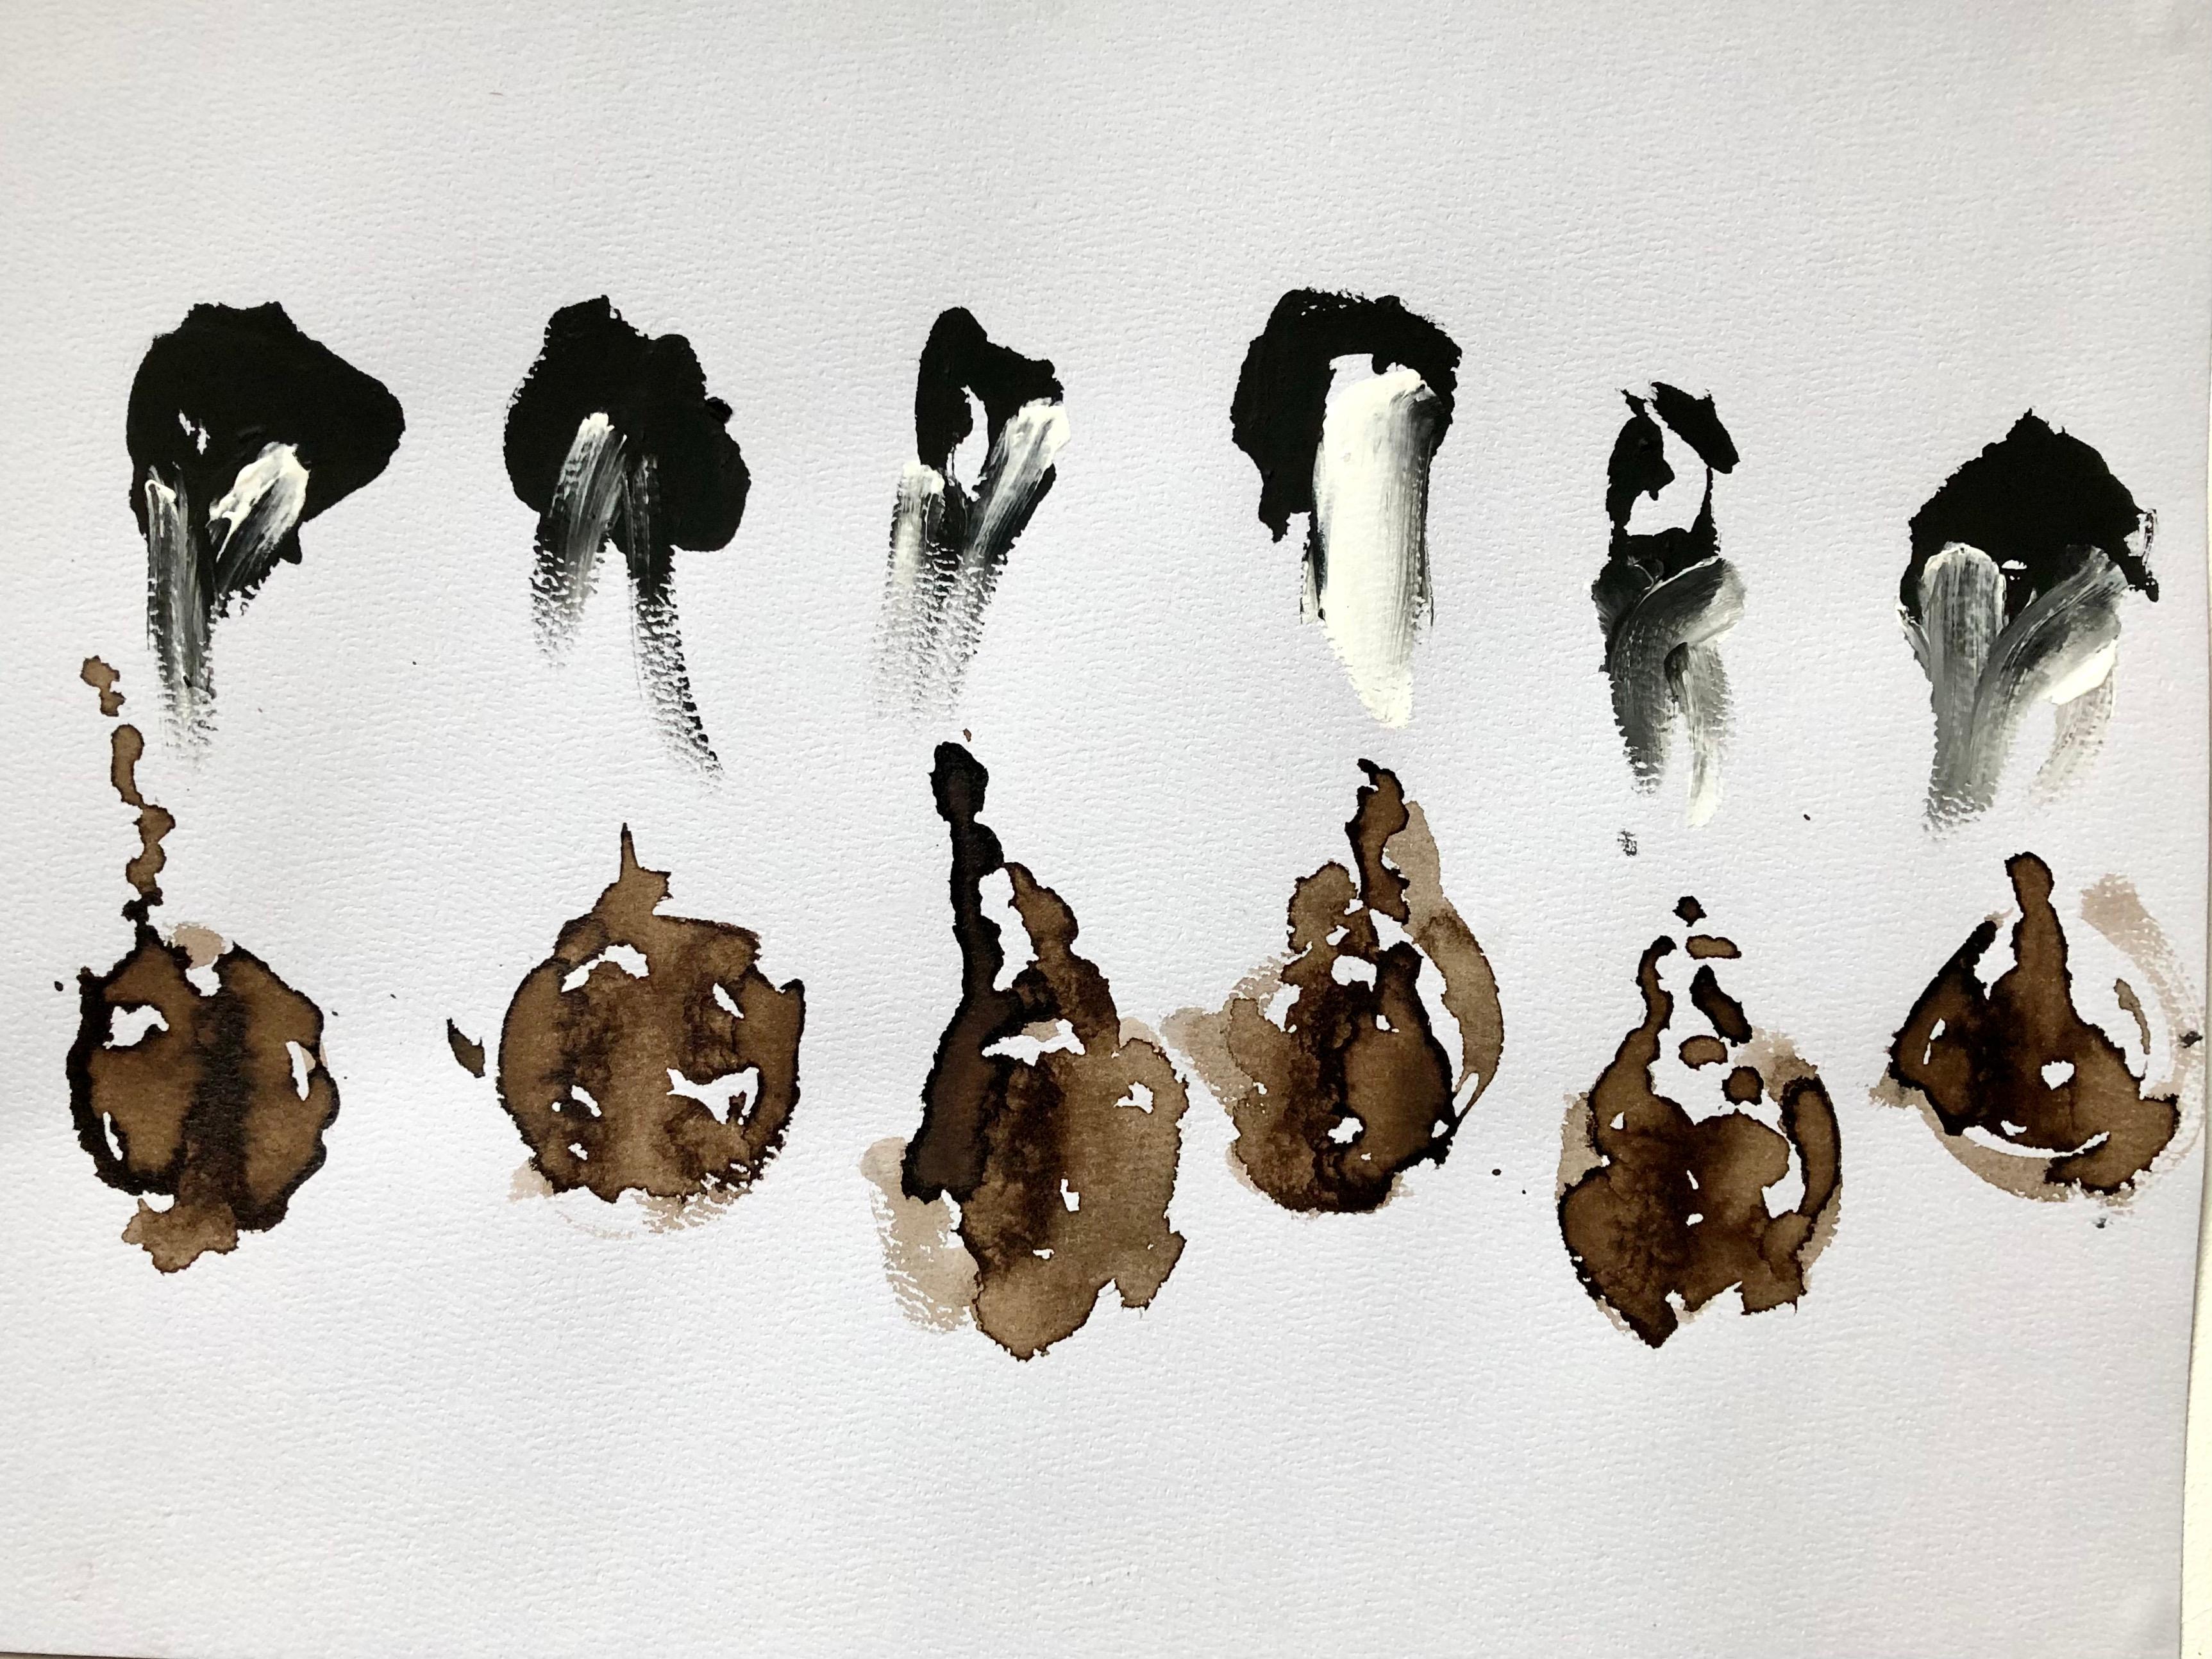 Indian ink, carbon black, walnut husk, gouaches & blue oil on AMT paper